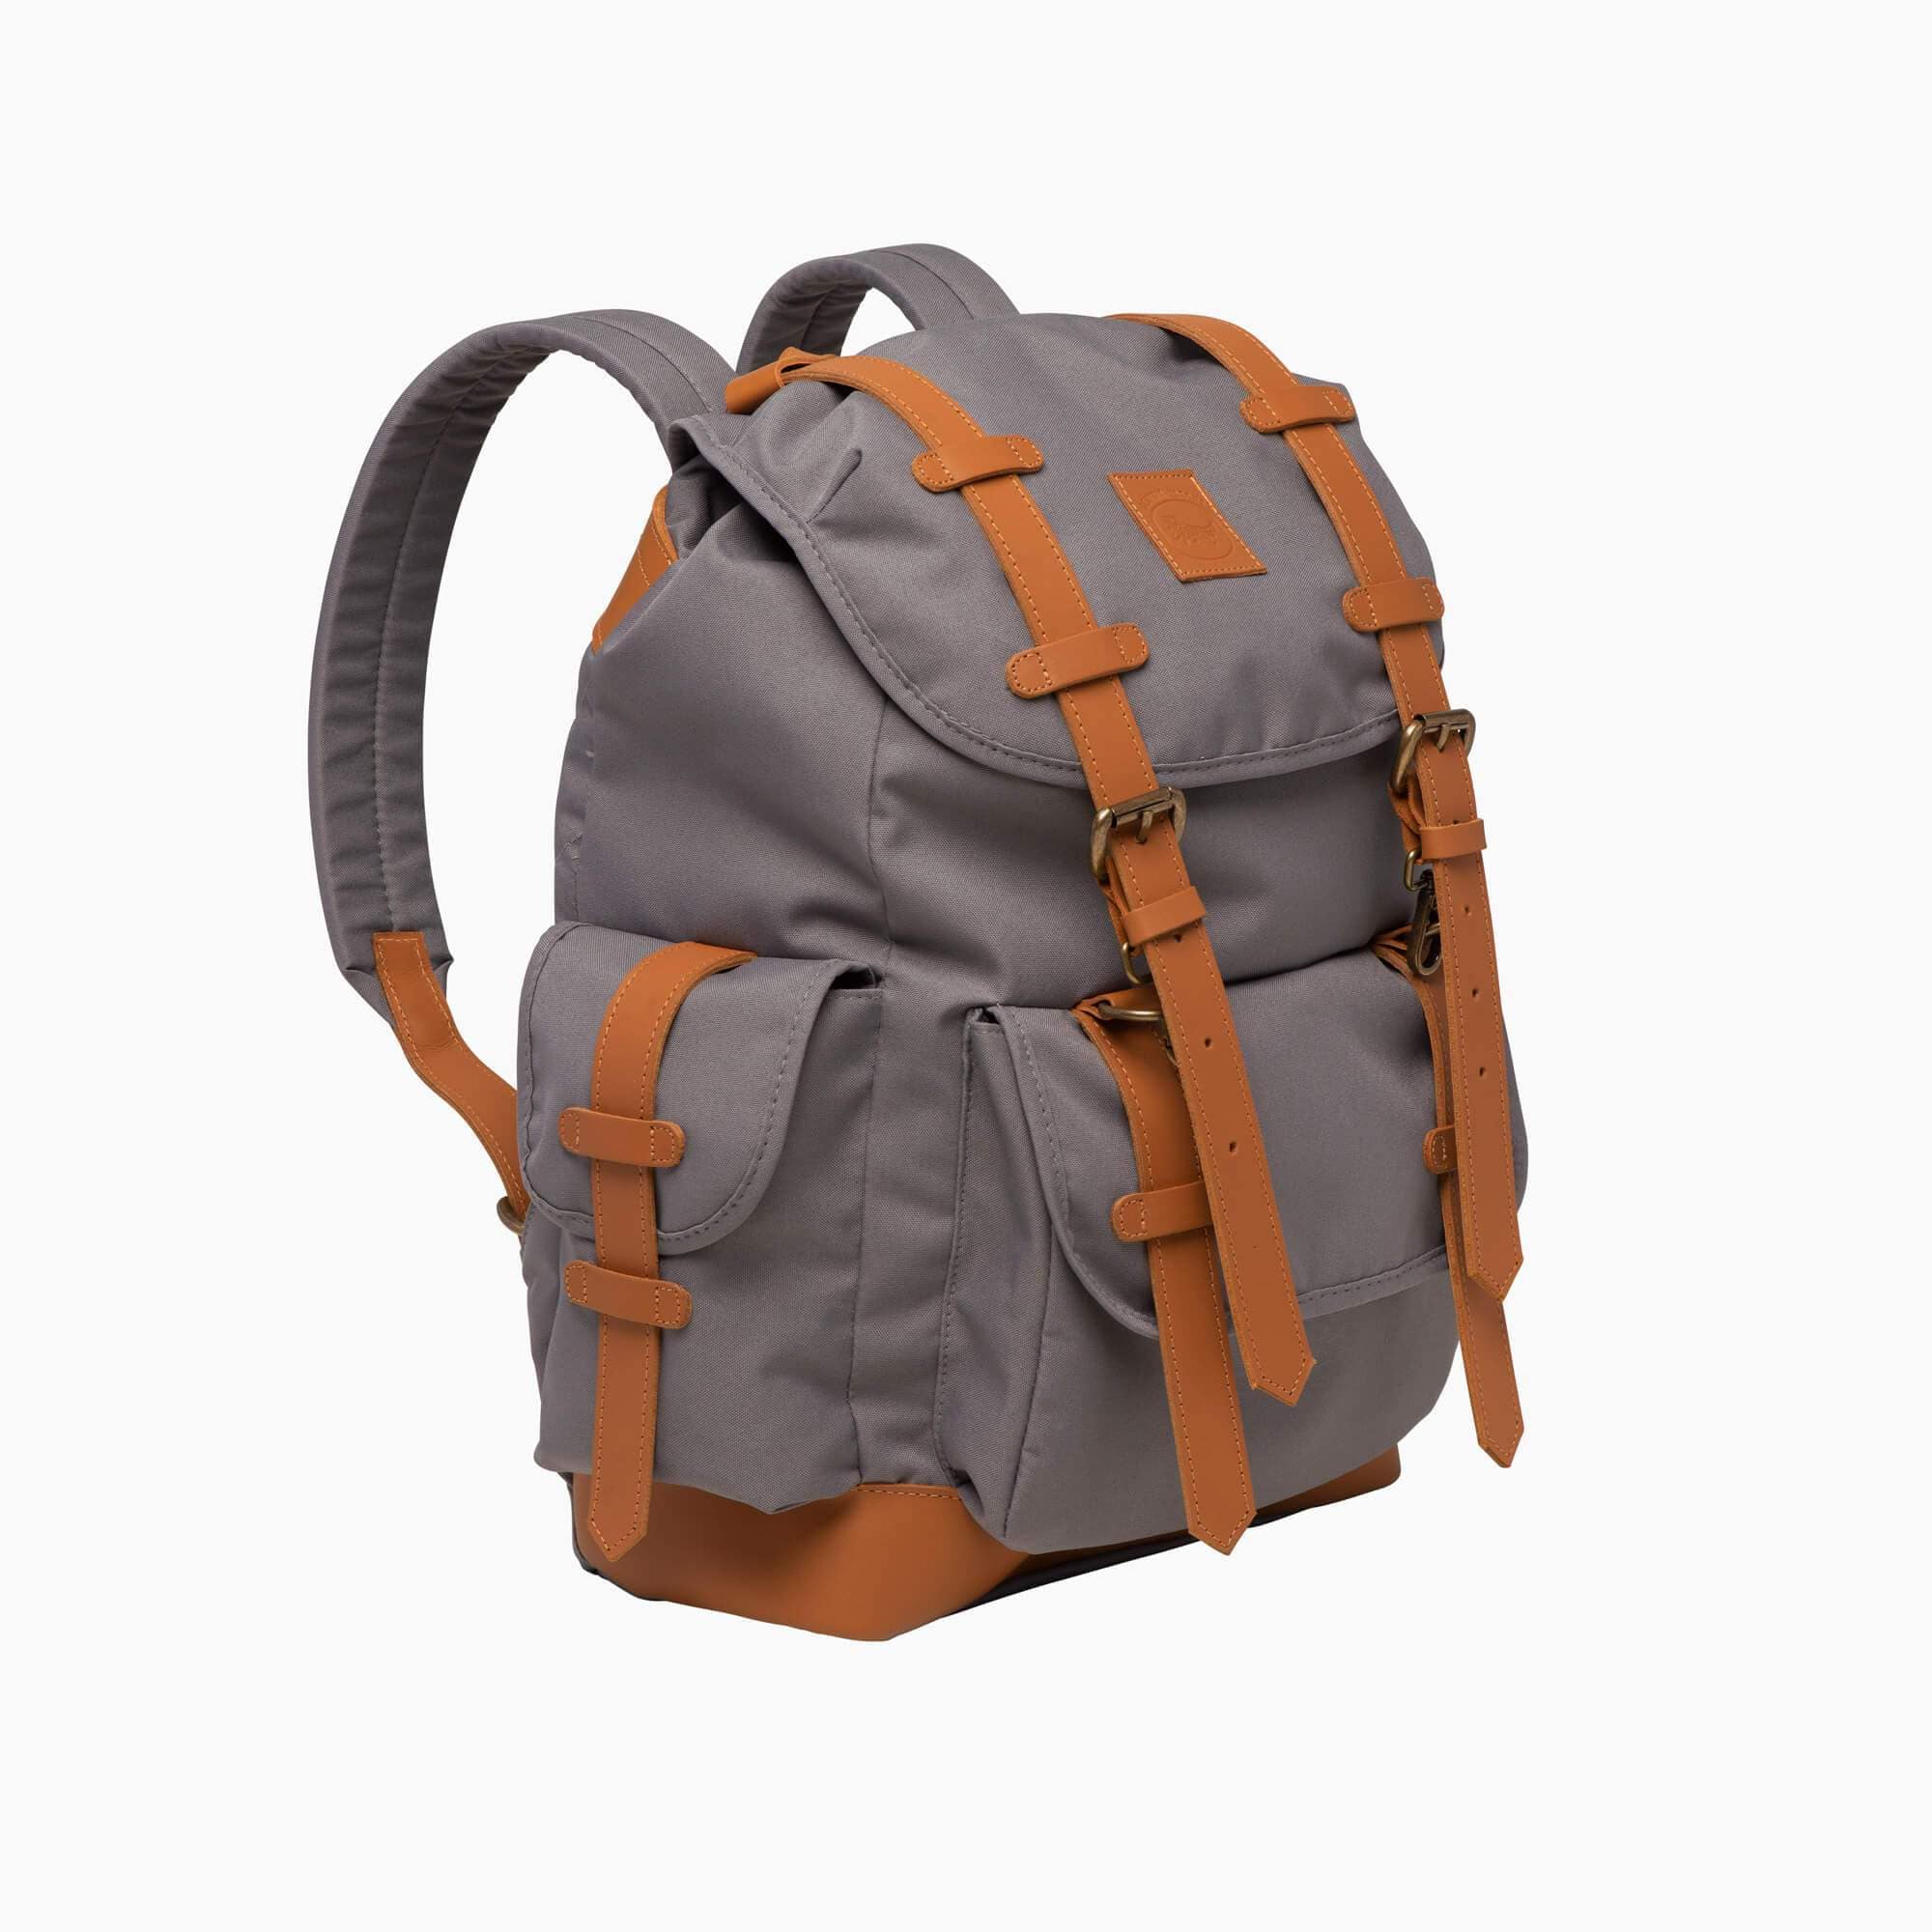 the Henry backpack